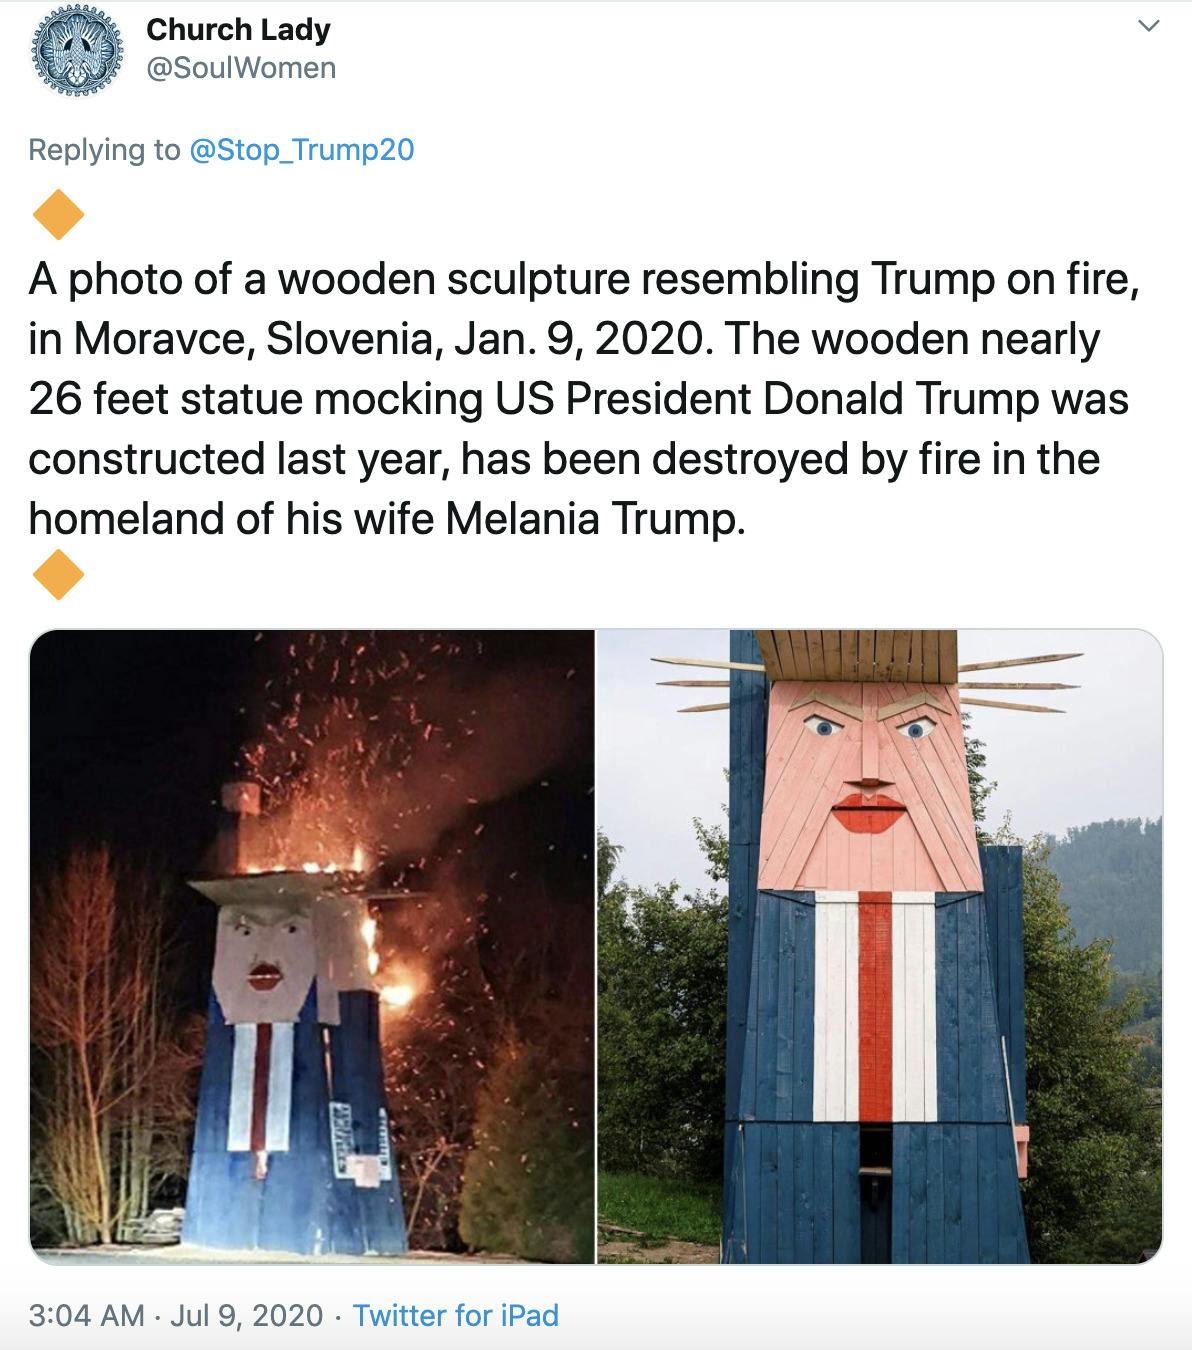 "A photo of a wooden sculpture resembling Trump on fire, in Moravce, Slovenia, Jan. 9, 2020. The wooden nearly 26 feet statue mocking US President Donald Trump was constructed last year, has been destroyed by fire in the homeland of his wife Melania Trump." over image of blocky wooden Trump sculpture and a second image of it on fire